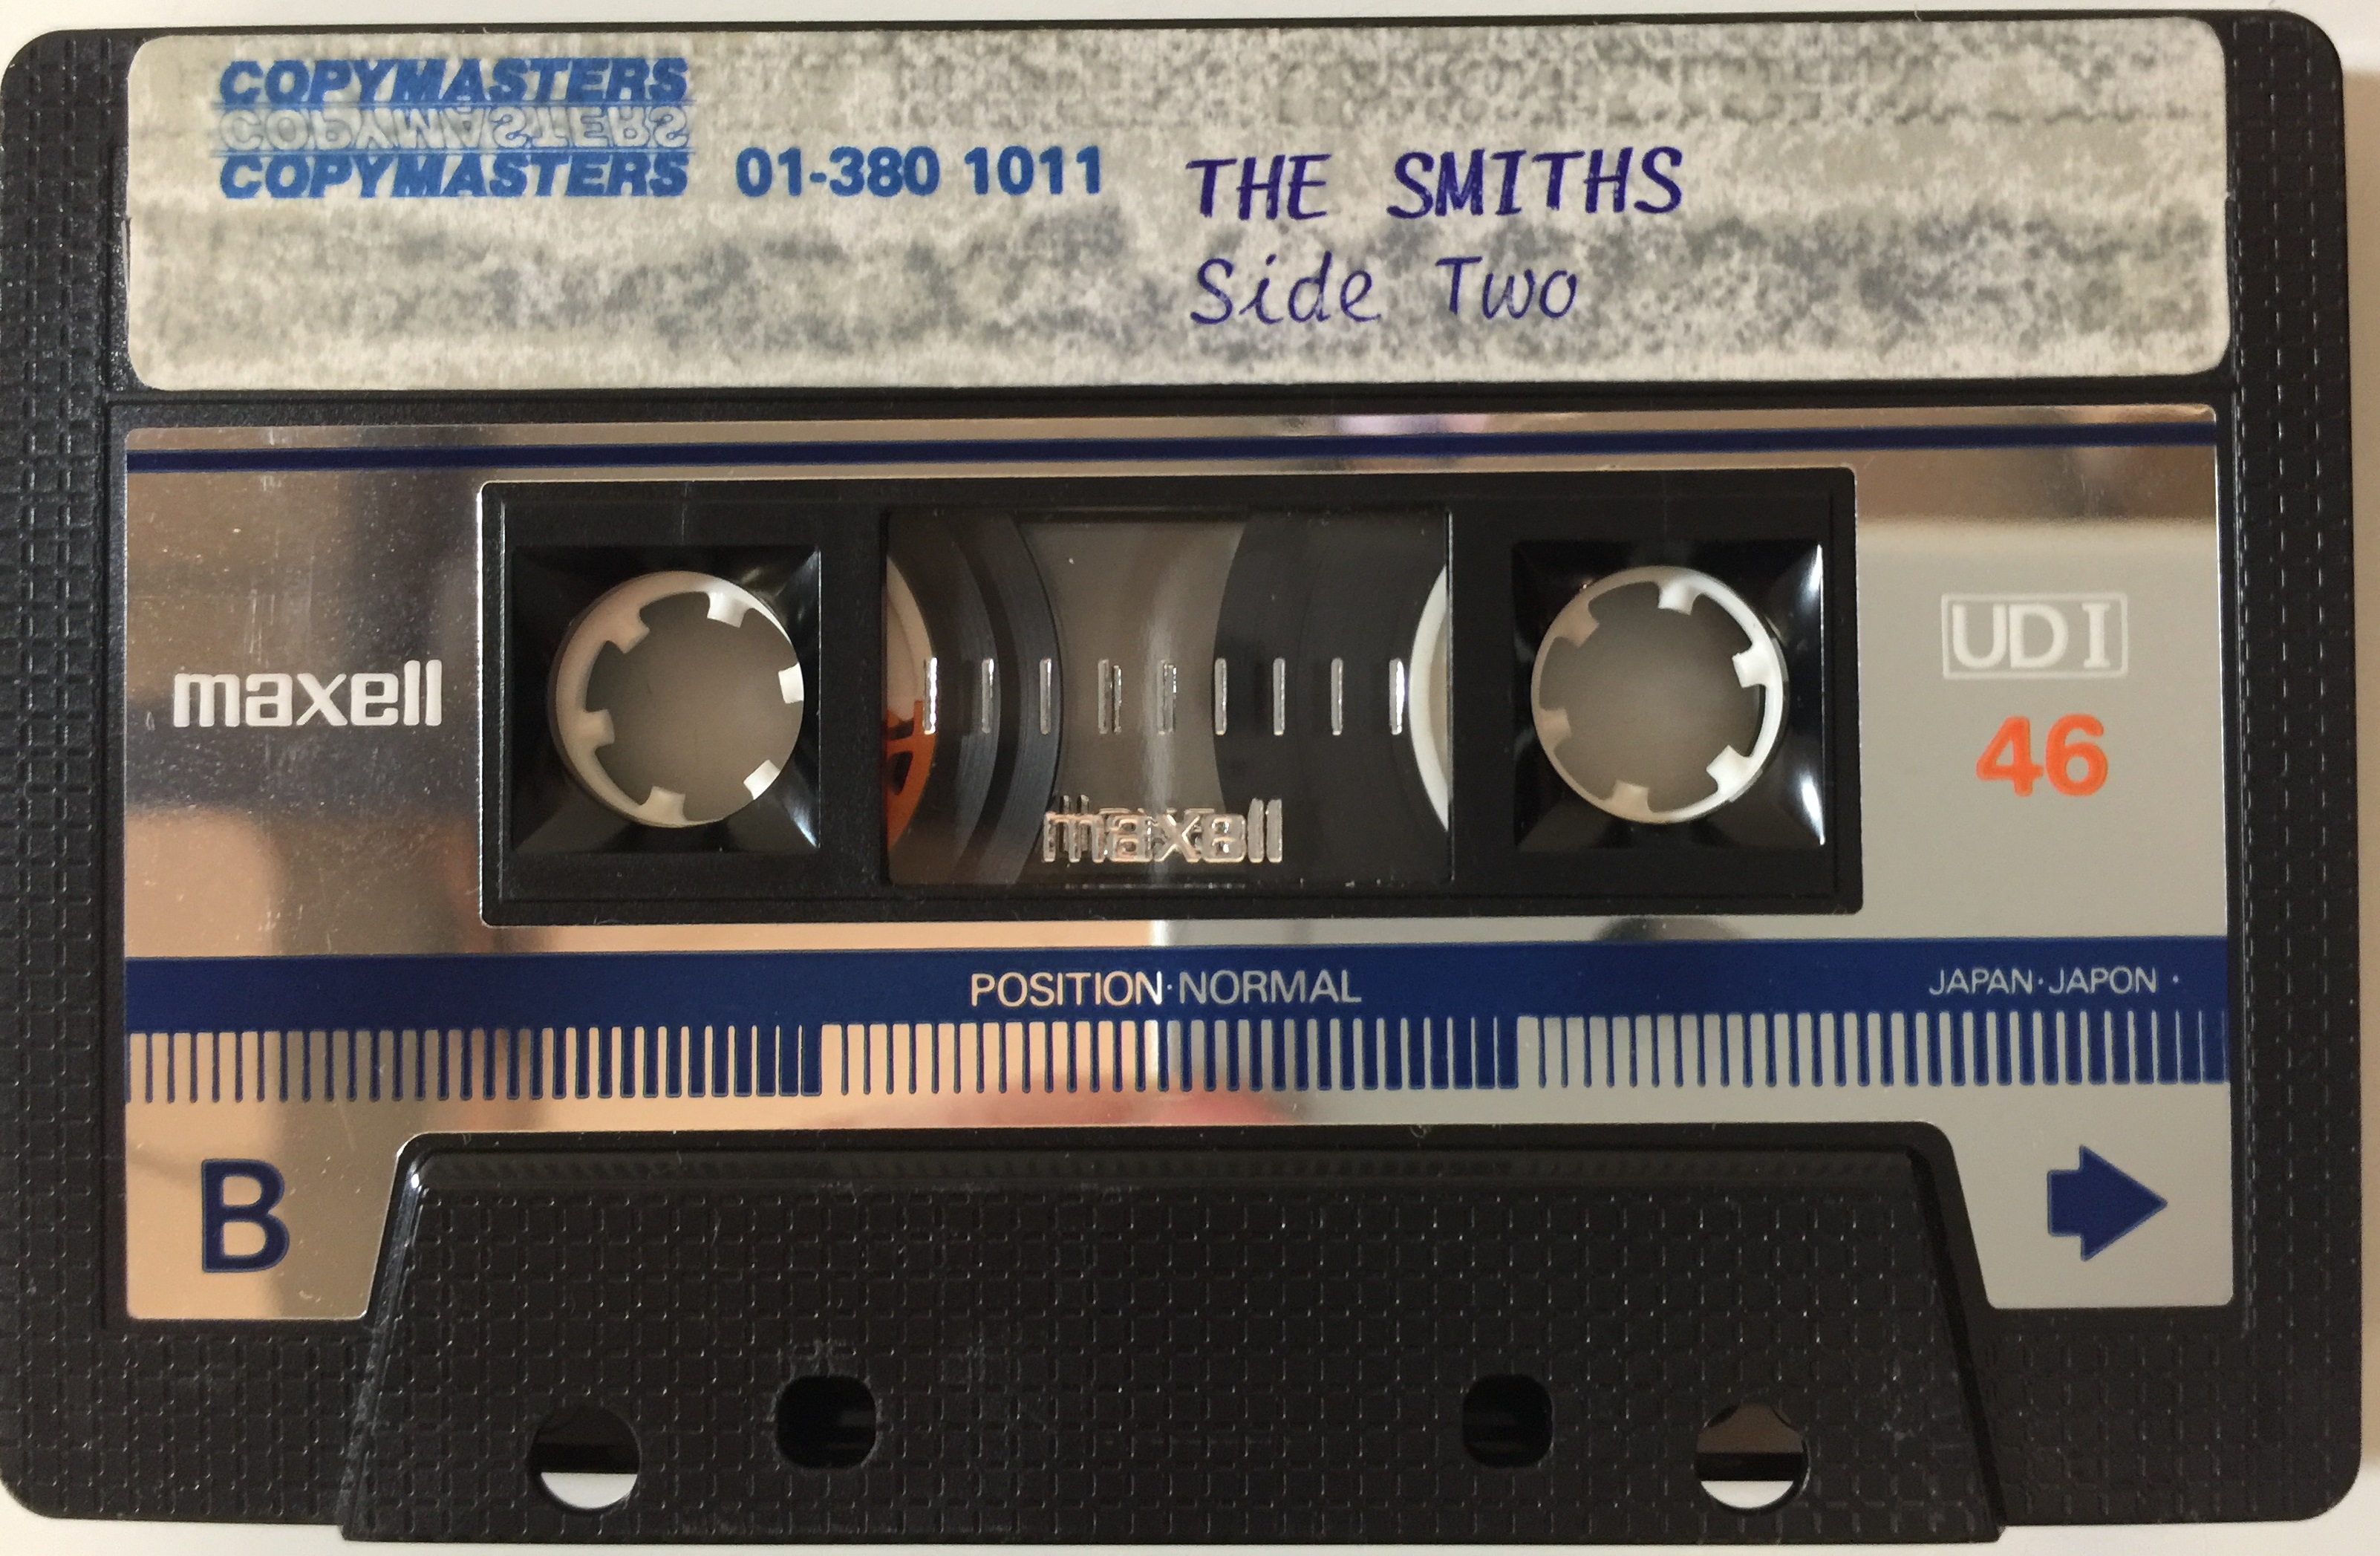 THE SMITHS - STRANGEWAYS HERE WE COME - COPYMASTERS DEMO CASSETTE. - Image 3 of 4